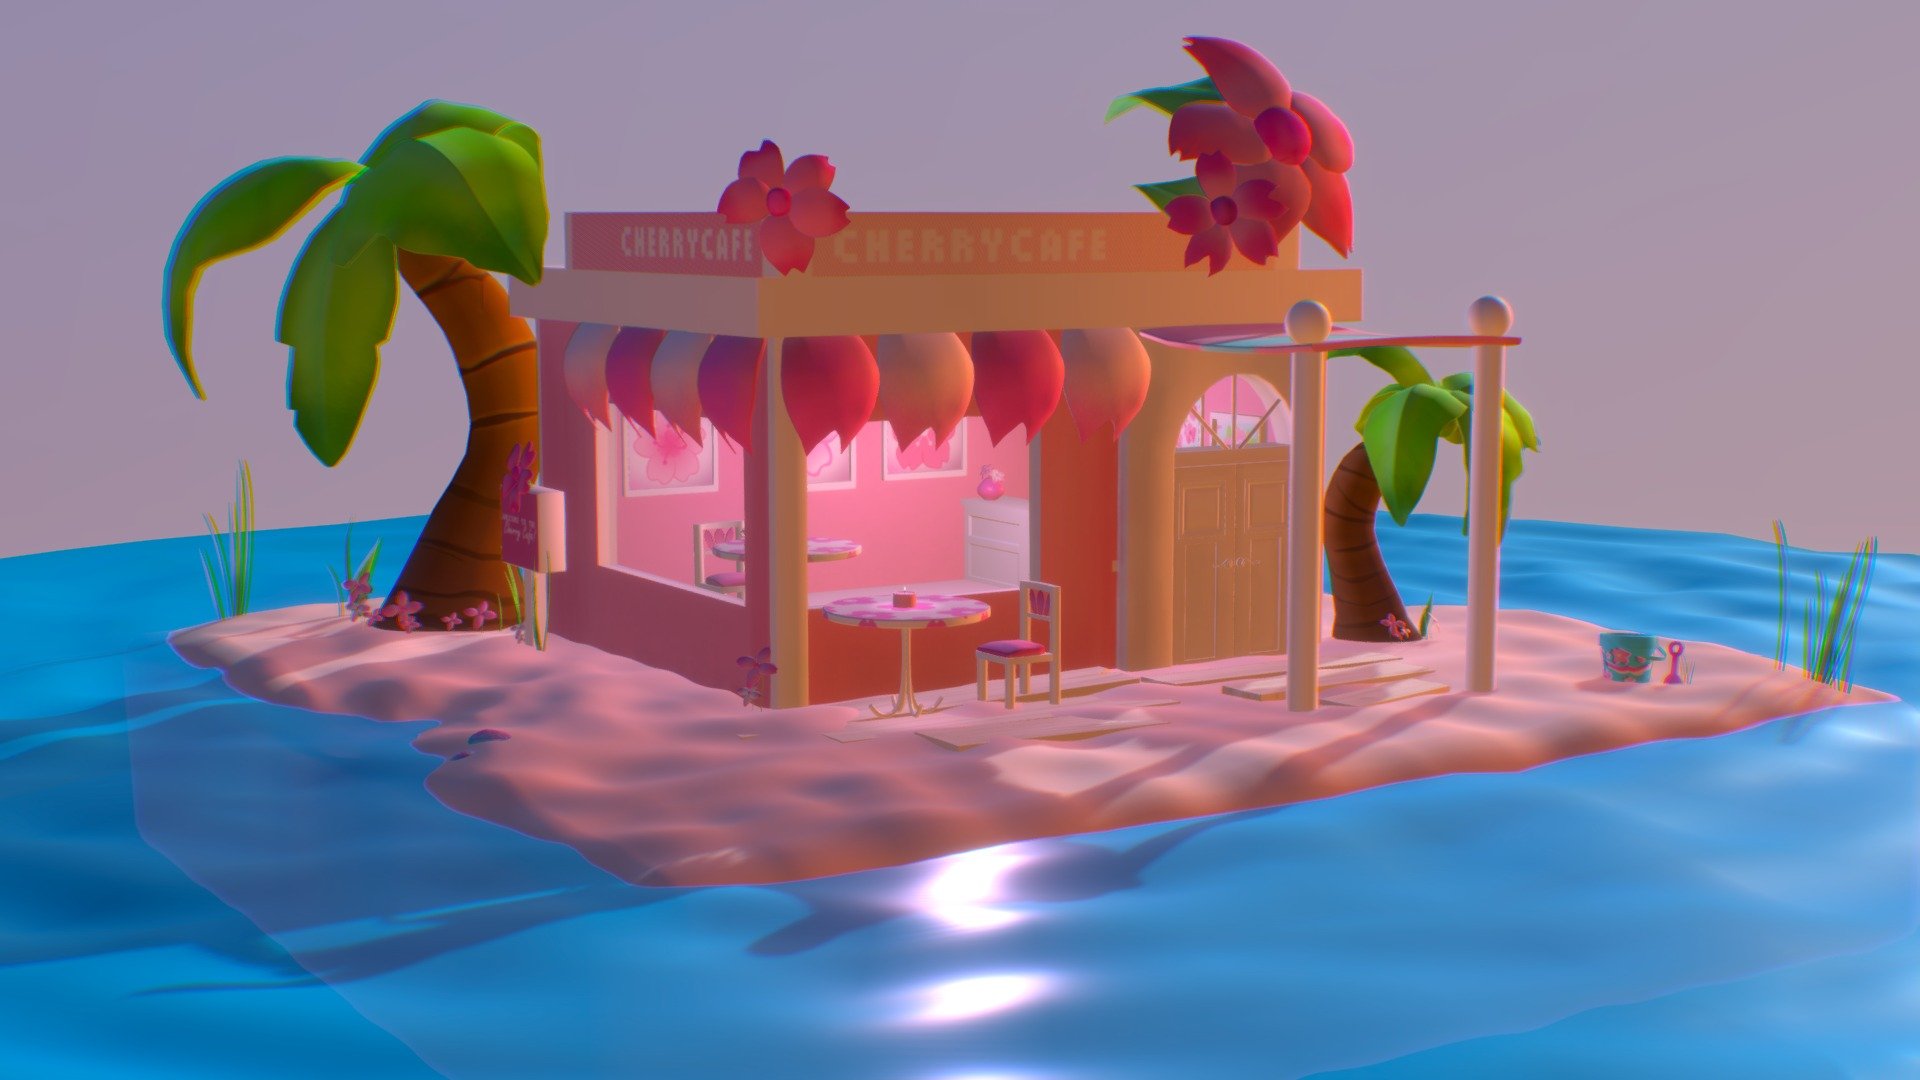 🌸 Welcome to the Cherry Café~! A little café surrounded by the sea, inspired by cherry blossom flowers.🌸

A personal assignment I created for a final school project. At the beginning of the semester, I began with simple drawings of diarama designs and ended up choosing this design to transform into a 3D model. I was so excited to see how I could work with this in sketchfab and I'm happy with the result. I am so thankful to have had mentorship throughout the course of this project. I received so much helpful feedback from my professors when it came to design, lighting, presentation, and so on 3d model